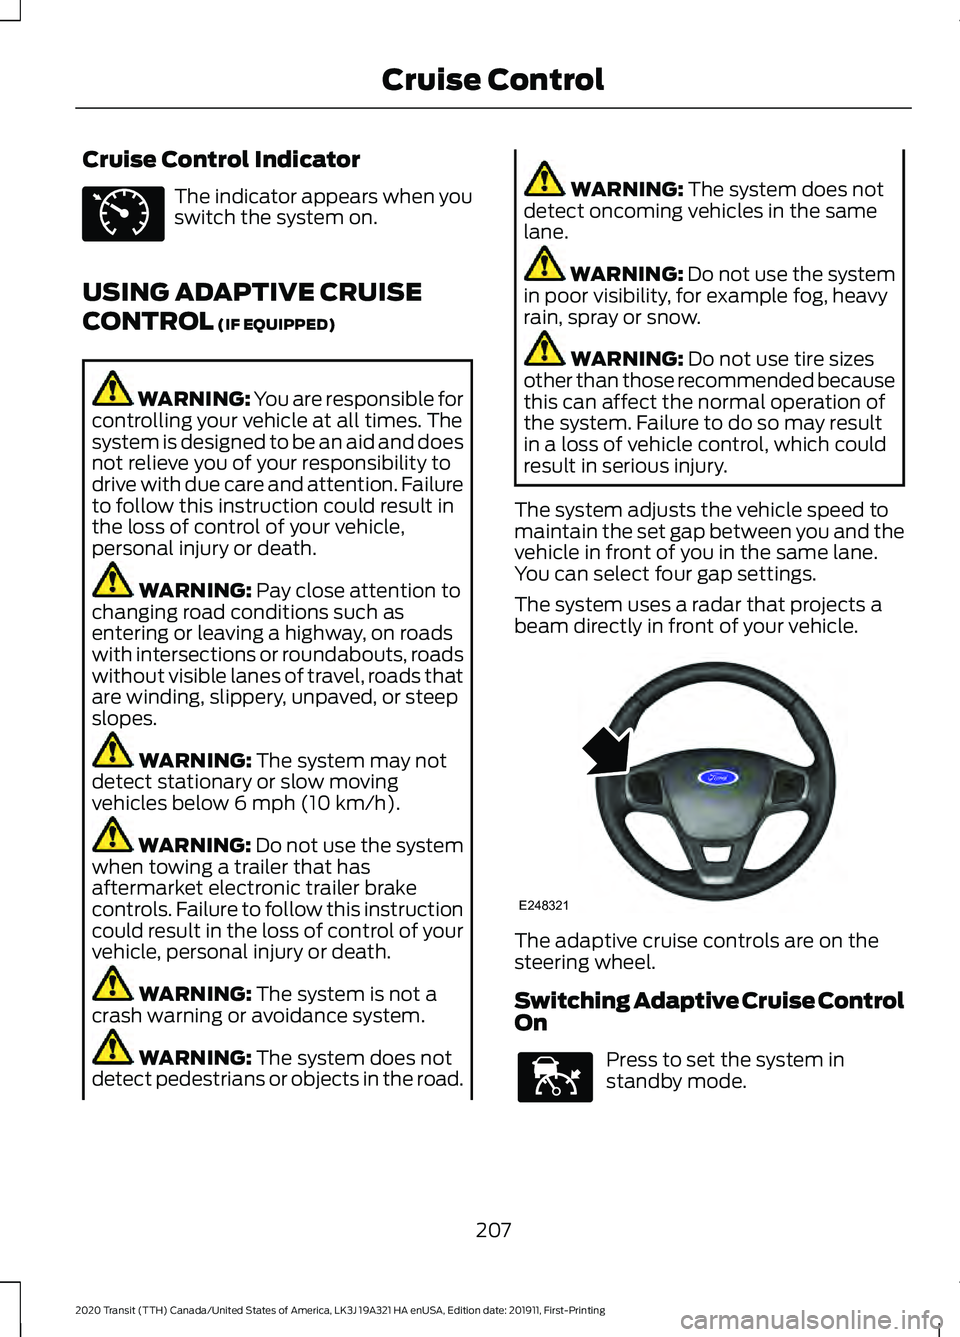 FORD TRANSIT 2020  Owners Manual Cruise Control Indicator
The indicator appears when you
switch the system on.
USING ADAPTIVE CRUISE
CONTROL (IF EQUIPPED) WARNING: You are responsible for
controlling your vehicle at all times. The
sy